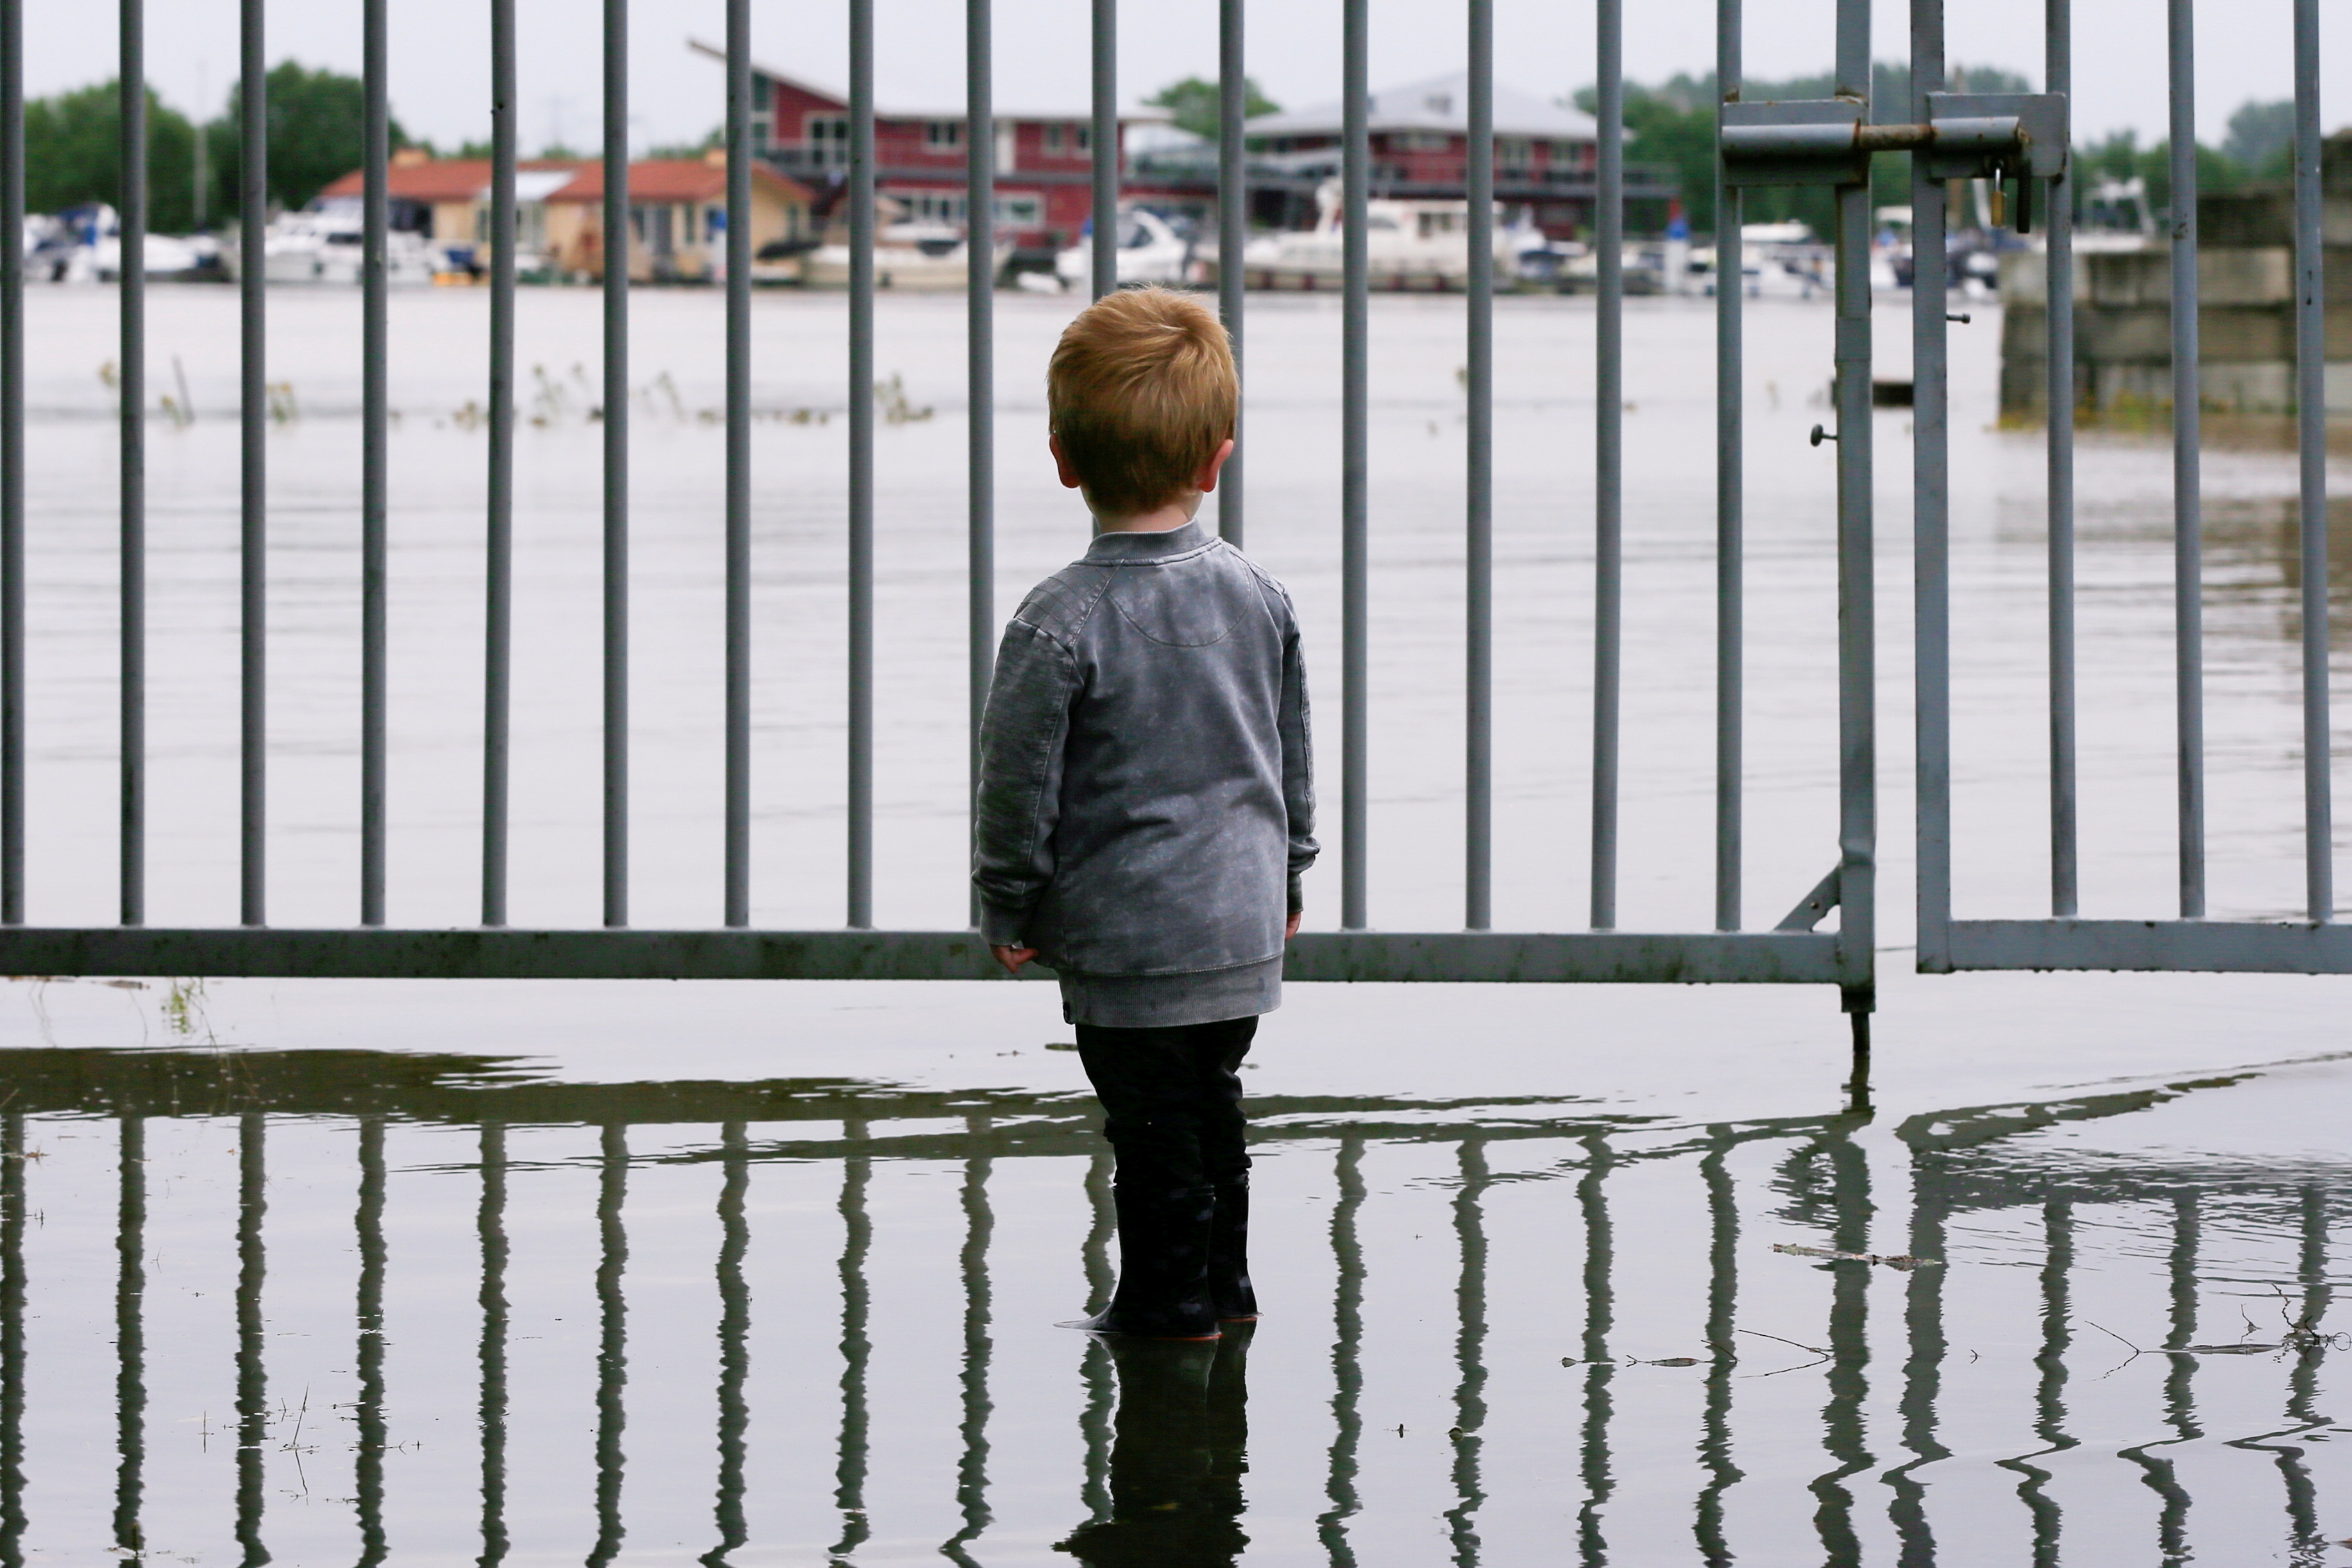 A child looks on as water floods through a fence in Wessem, Netherlands, July 16, 2021. REUTERS/Eva Plevier/File Photo